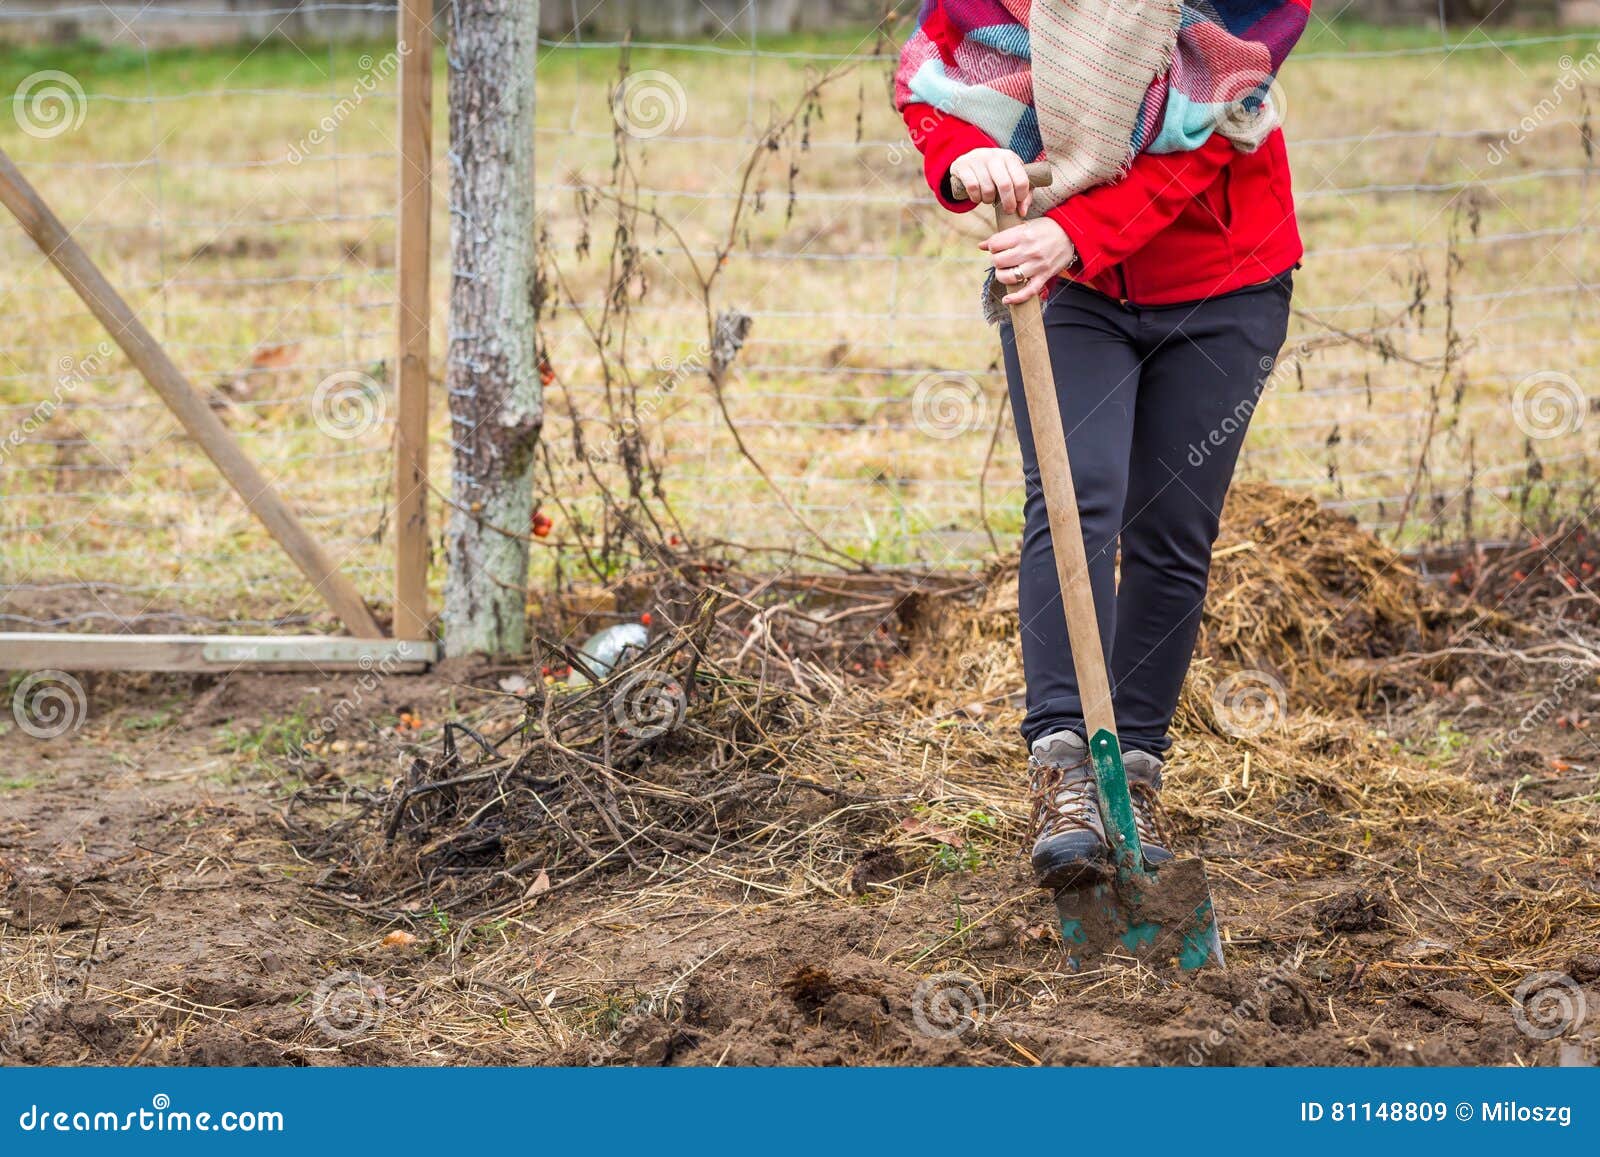 Woman Digging with Spade in Garden Stock Image - Image of dirt, handle ...